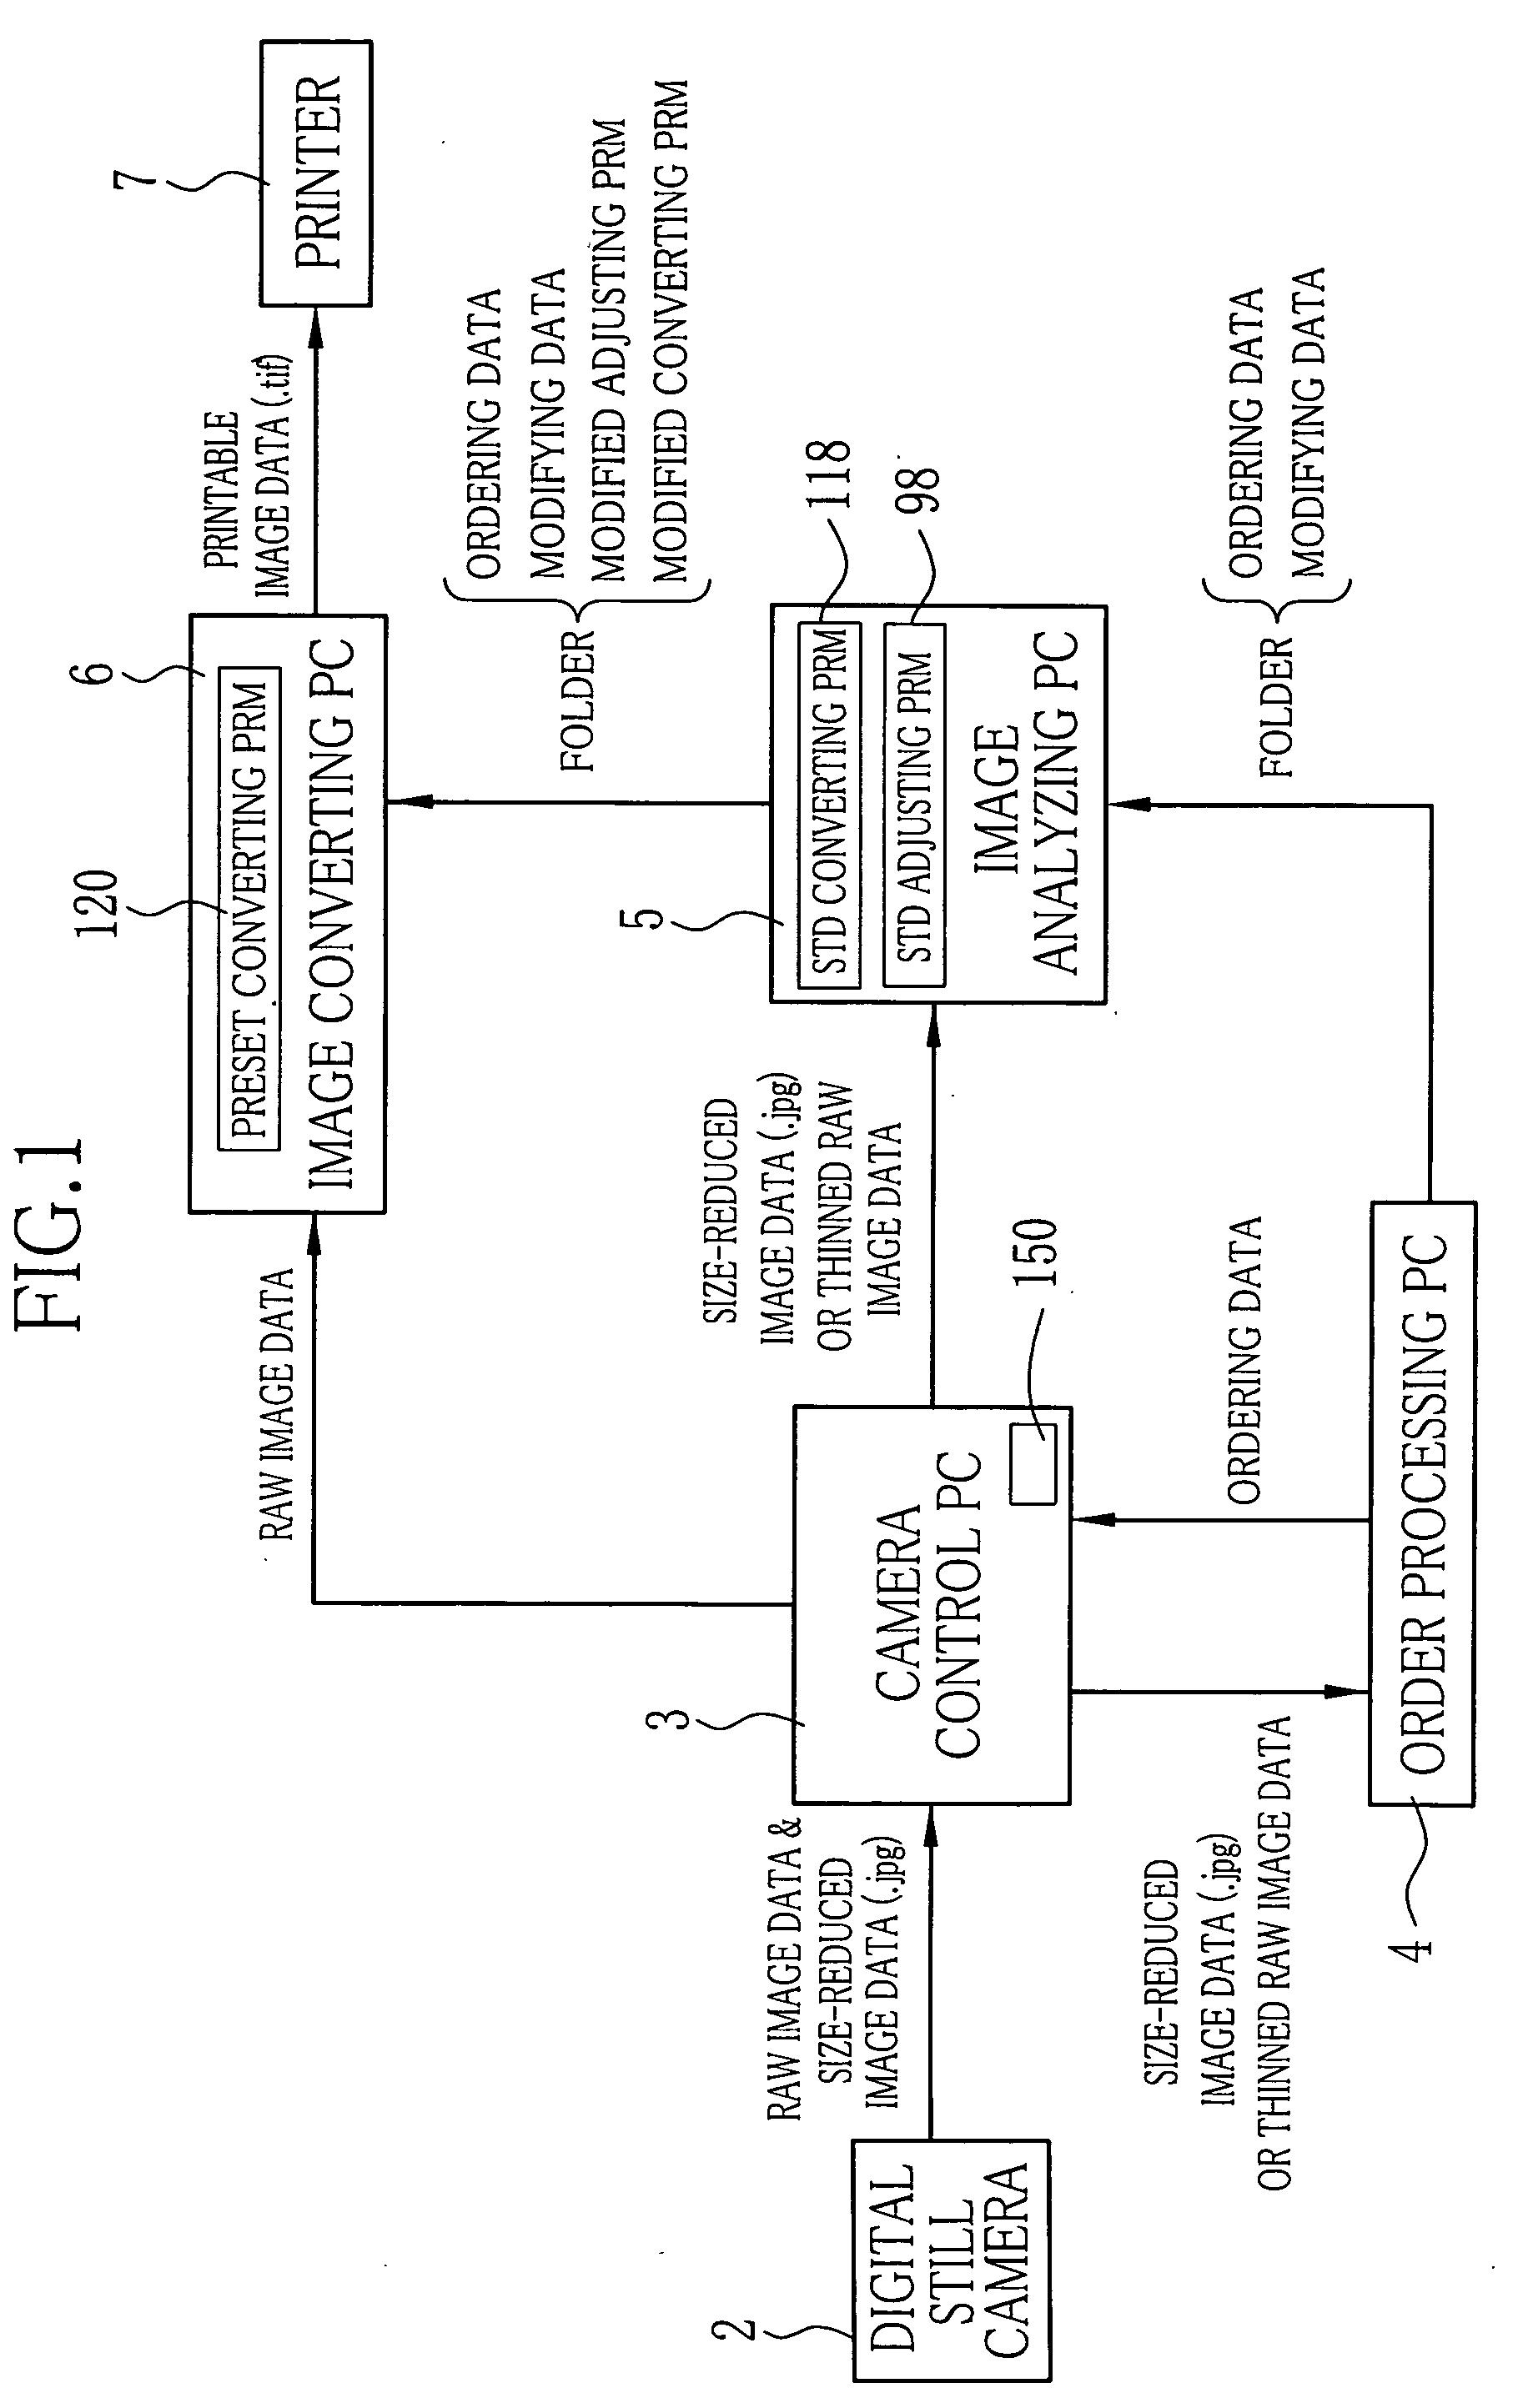 Method, apparatus, system, and computer executable program for image processing